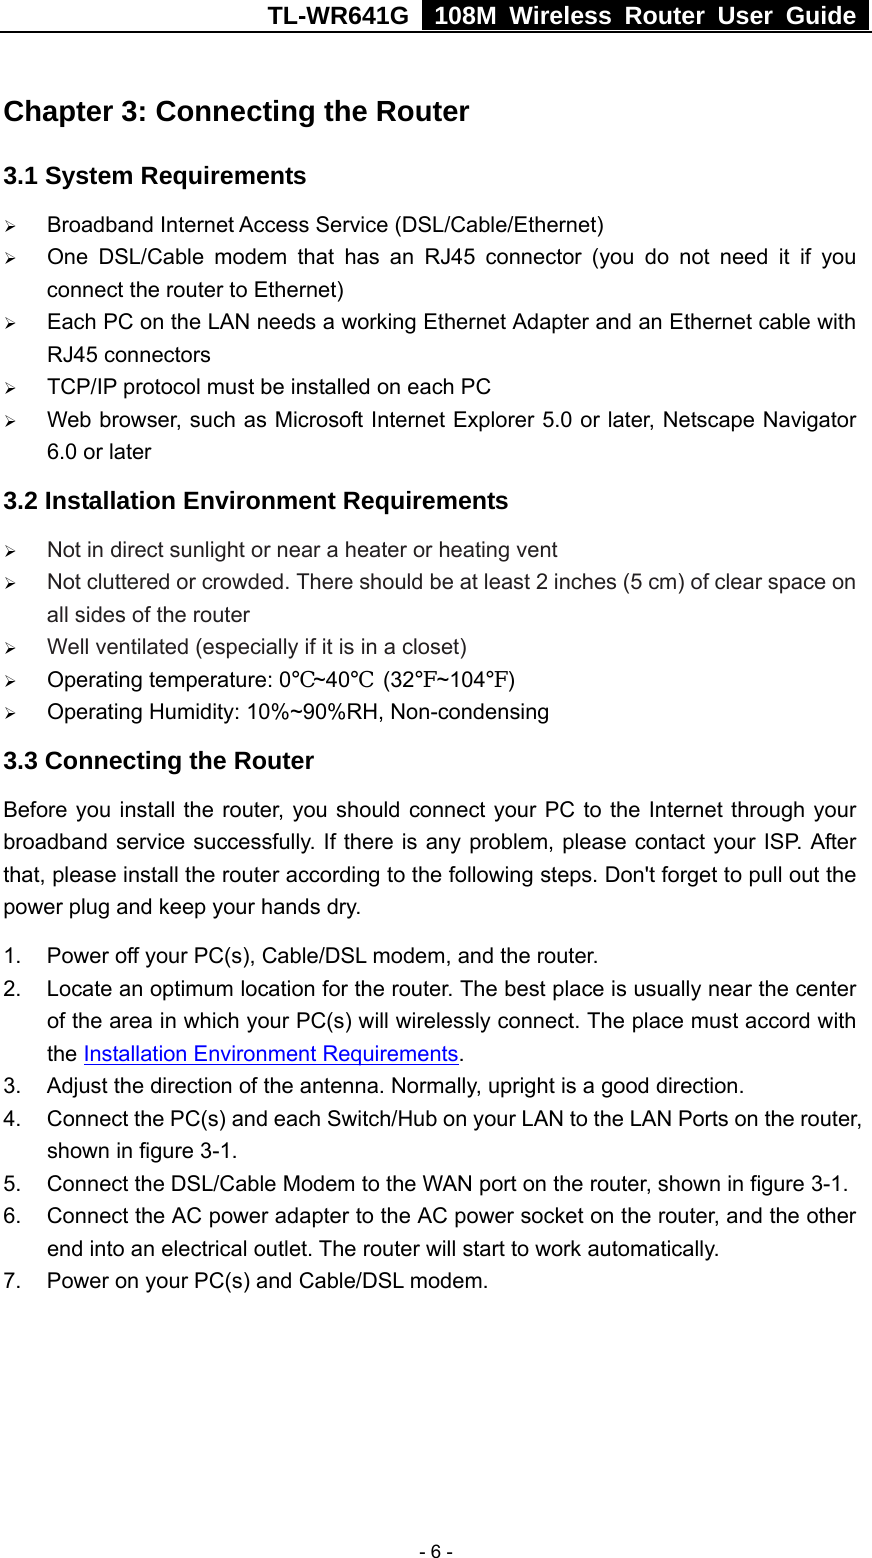 TL-WR641G   108M Wireless Router User Guide   - 6 -Chapter 3: Connecting the Router 3.1 System Requirements ¾ Broadband Internet Access Service (DSL/Cable/Ethernet) ¾ One DSL/Cable modem that has an RJ45 connector (you do not need it if you connect the router to Ethernet) ¾ Each PC on the LAN needs a working Ethernet Adapter and an Ethernet cable with RJ45 connectors ¾ TCP/IP protocol must be installed on each PC ¾ Web browser, such as Microsoft Internet Explorer 5.0 or later, Netscape Navigator 6.0 or later 3.2 Installation Environment Requirements ¾ Not in direct sunlight or near a heater or heating vent ¾ Not cluttered or crowded. There should be at least 2 inches (5 cm) of clear space on all sides of the router ¾ Well ventilated (especially if it is in a closet) ¾ Operating temperature: 0℃~40℃ (32℉~104℉) ¾ Operating Humidity: 10%~90%RH, Non-condensing 3.3 Connecting the Router Before you install the router, you should connect your PC to the Internet through your broadband service successfully. If there is any problem, please contact your ISP. After that, please install the router according to the following steps. Don&apos;t forget to pull out the power plug and keep your hands dry. 1.  Power off your PC(s), Cable/DSL modem, and the router. 2.  Locate an optimum location for the router. The best place is usually near the center of the area in which your PC(s) will wirelessly connect. The place must accord with the Installation Environment Requirements. 3.  Adjust the direction of the antenna. Normally, upright is a good direction. 4.  Connect the PC(s) and each Switch/Hub on your LAN to the LAN Ports on the router, shown in figure 3-1. 5. Connect the DSL/Cable Modem to the WAN port on the router, shown in figure 3-1. 6.  Connect the AC power adapter to the AC power socket on the router, and the other end into an electrical outlet. The router will start to work automatically. 7.  Power on your PC(s) and Cable/DSL modem. 